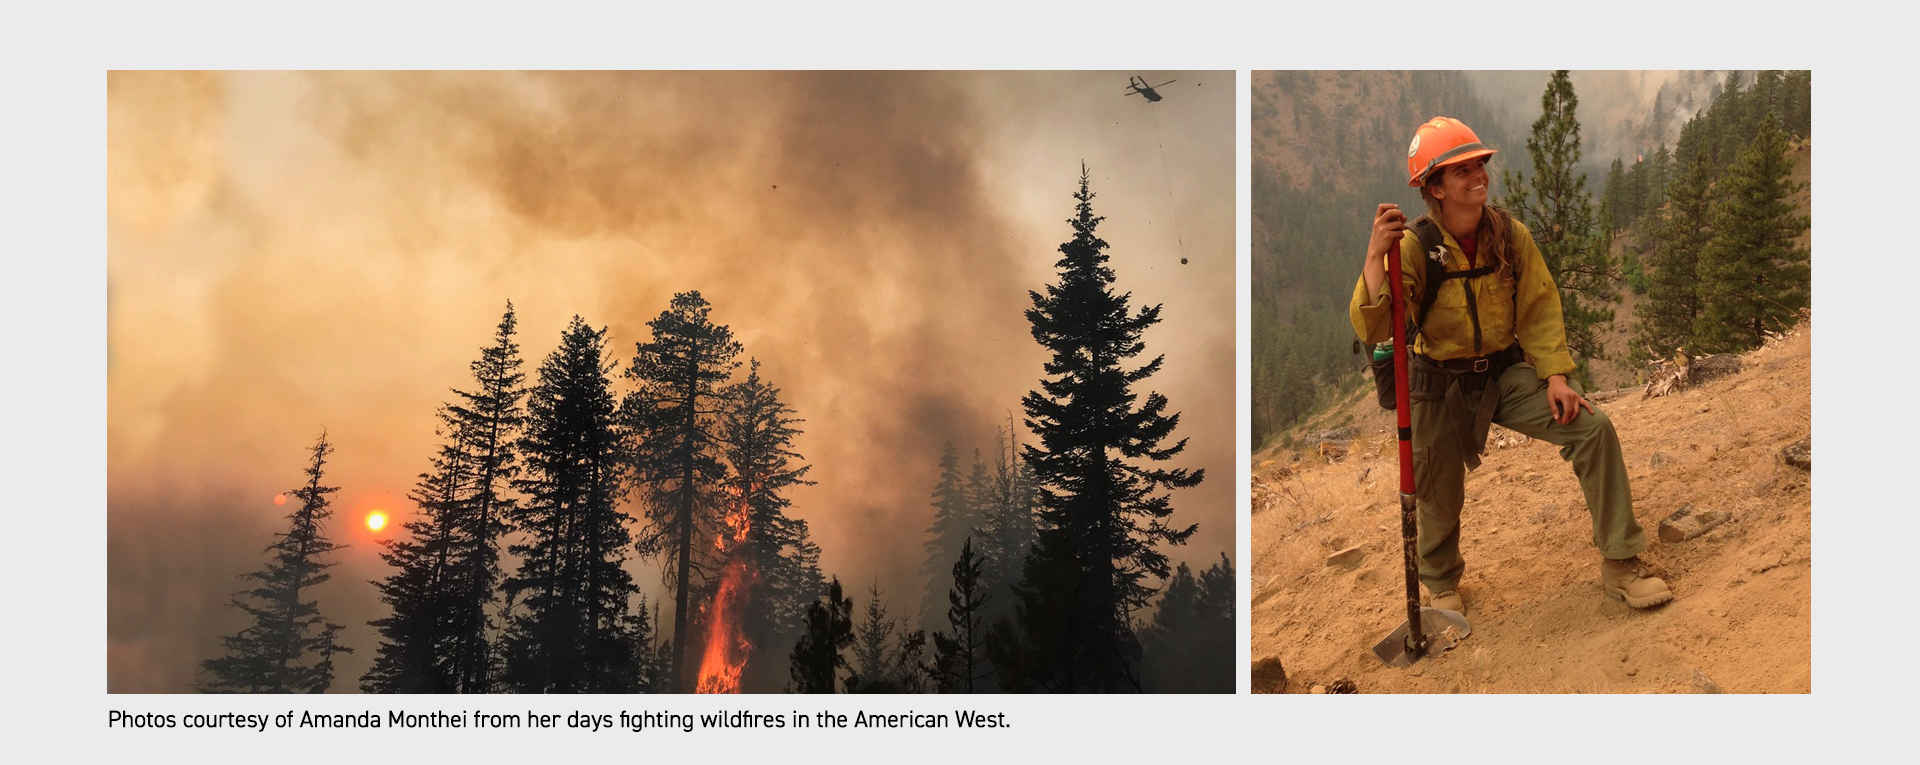 Photos courtesy of Amanda Monthei from her days fighting wildfires in the American West.